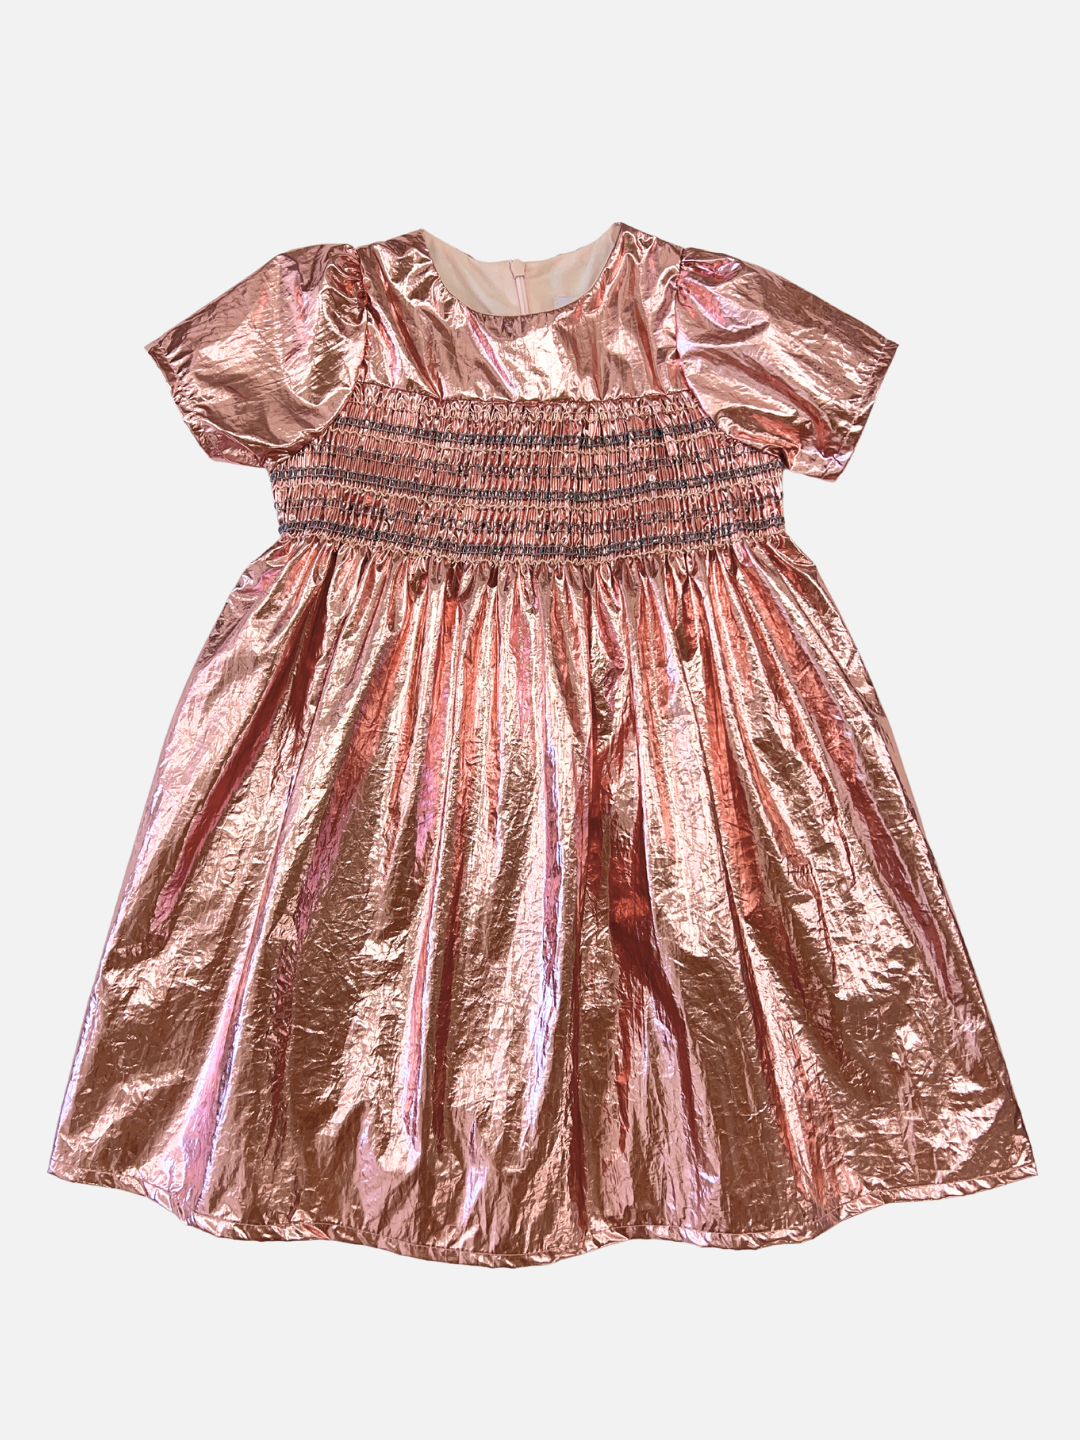 Rose | Kids party dress in pink metallic fabric with a round neck, short sleeves, smocked bodice, empire waist and full skirt.